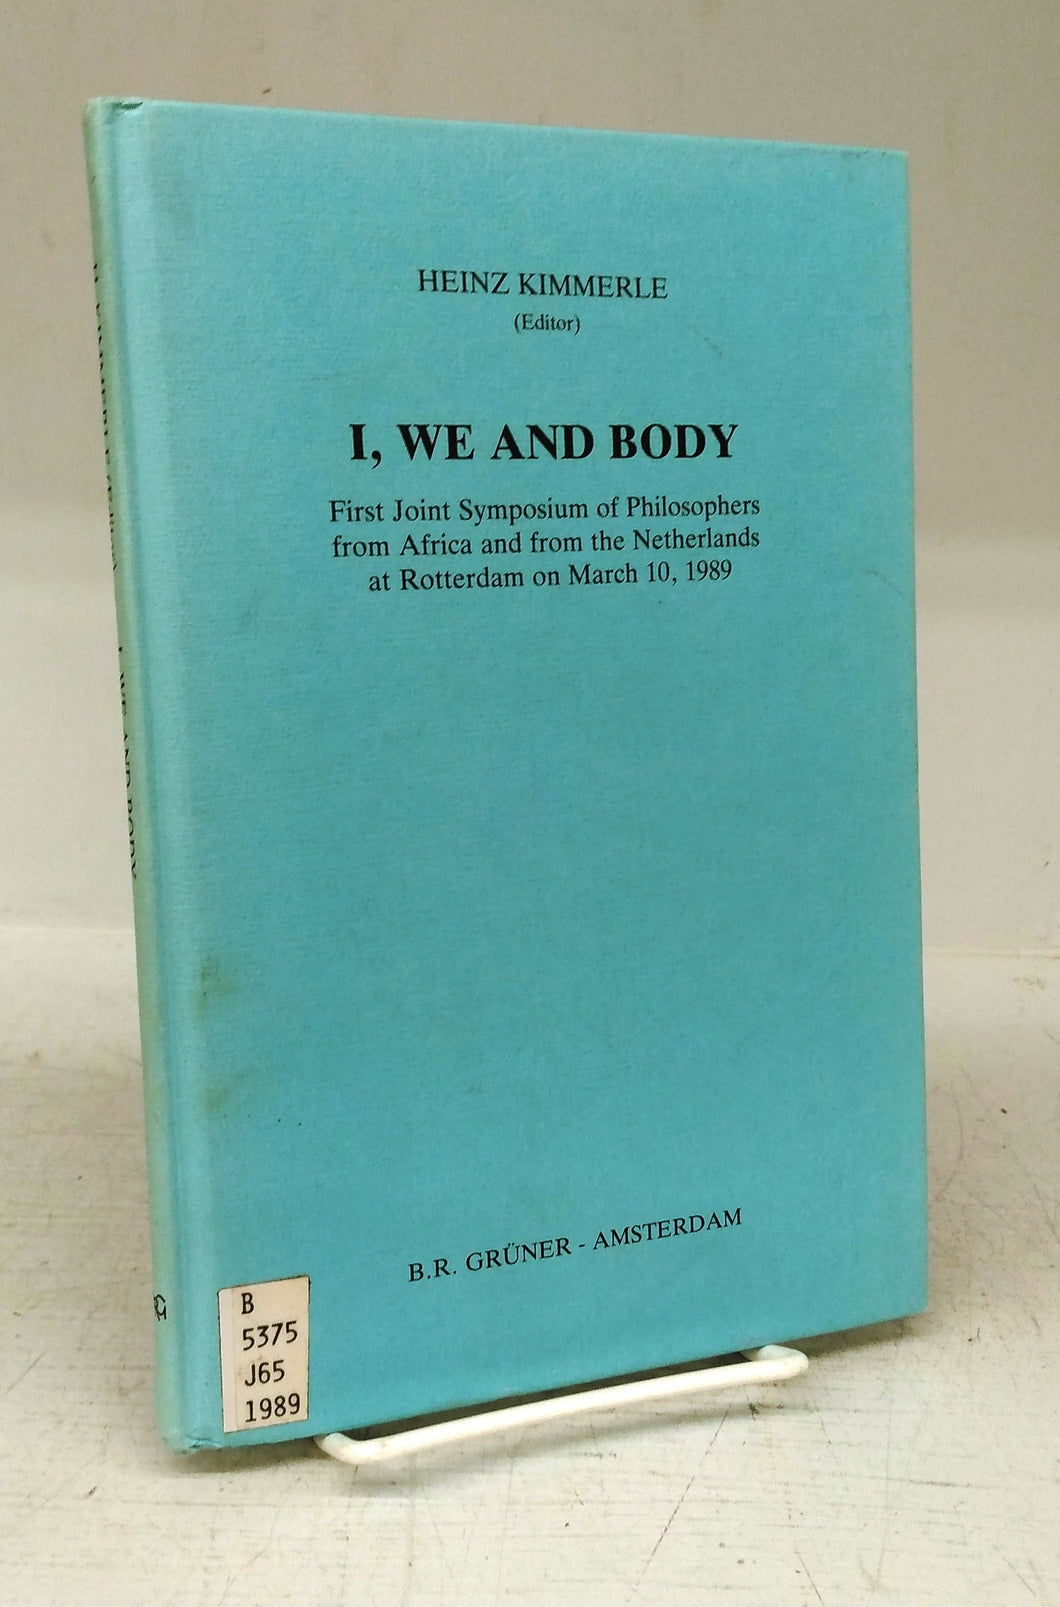 I, We and Body: First Joint Symposium of Philosophers from Africa and from the Netherlands at Rotterdam on March 10, 1989